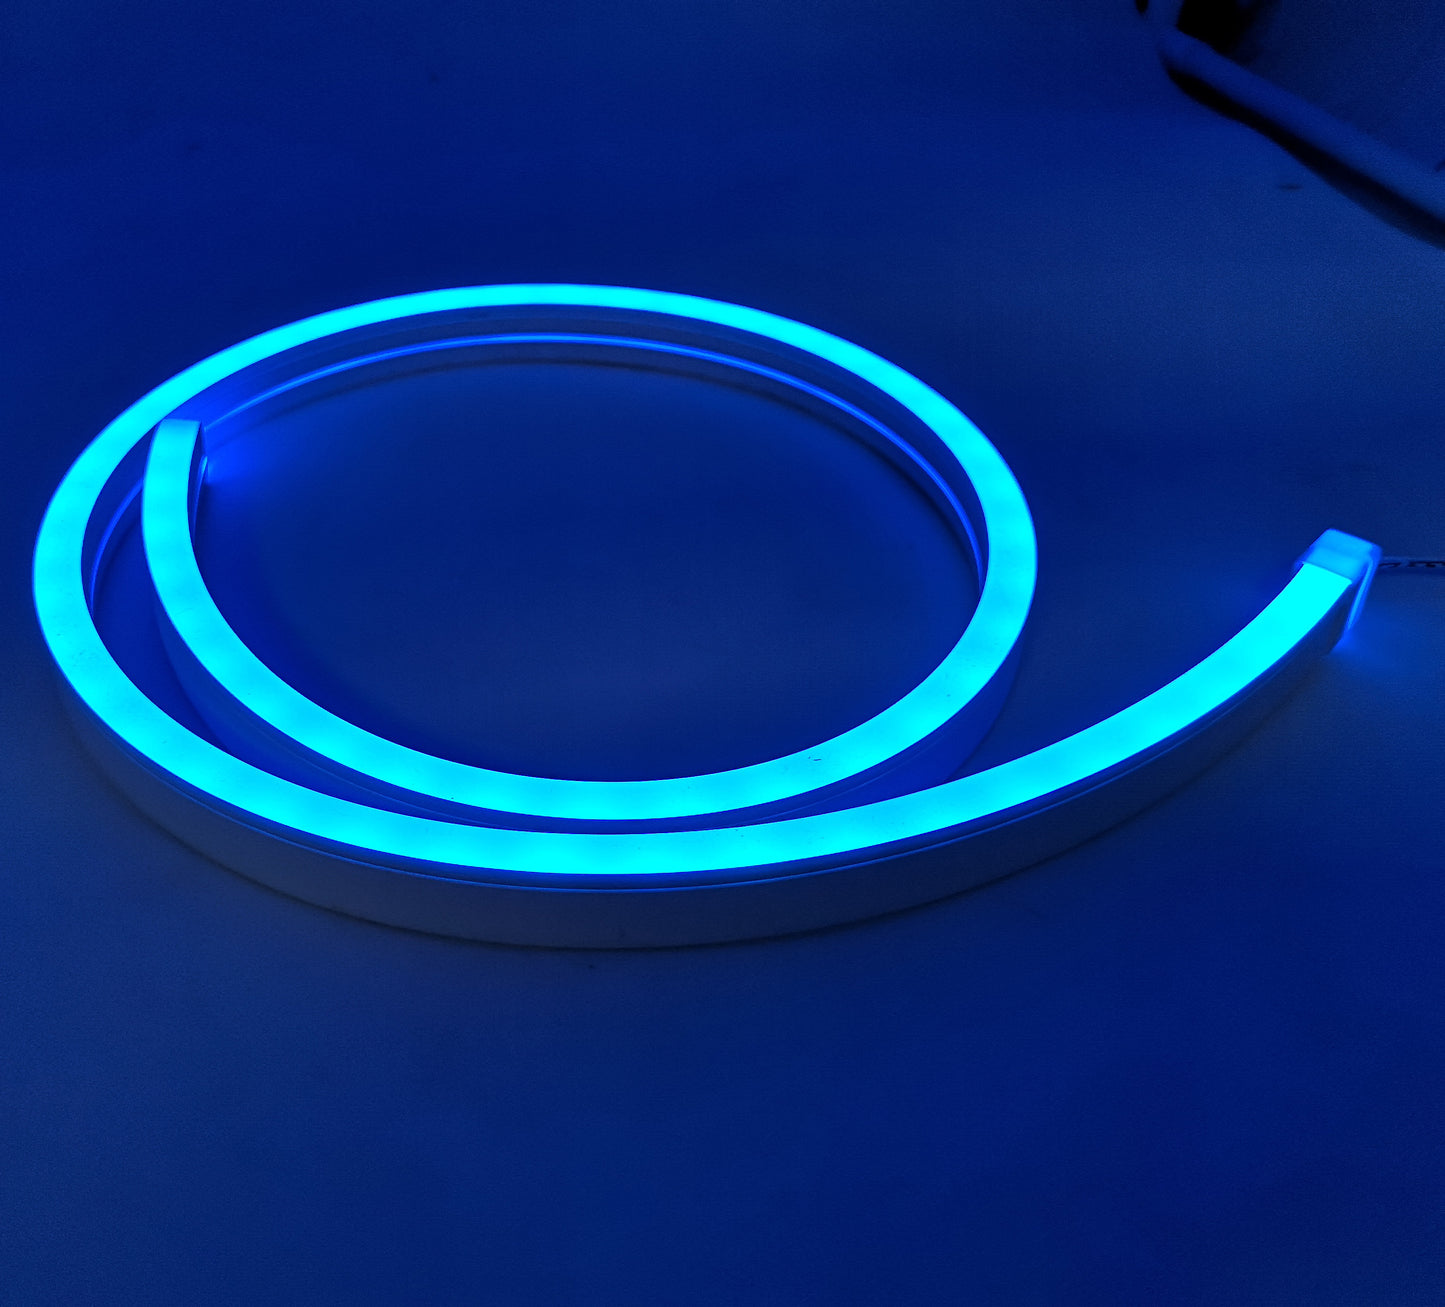 Send inquiry for 12V Silicon LED Strip Light Manufacturers 5mm Task Lighting Under Cabinet to high qualitySilicon LED Strip Light Manufacturers supplier. WholesaleTask Lighting Under Cabinet directly from China LED Strip Light Manufacturers manufacturers/exporters. Get a factory sale price list and become a distributor/agent-vstled.com